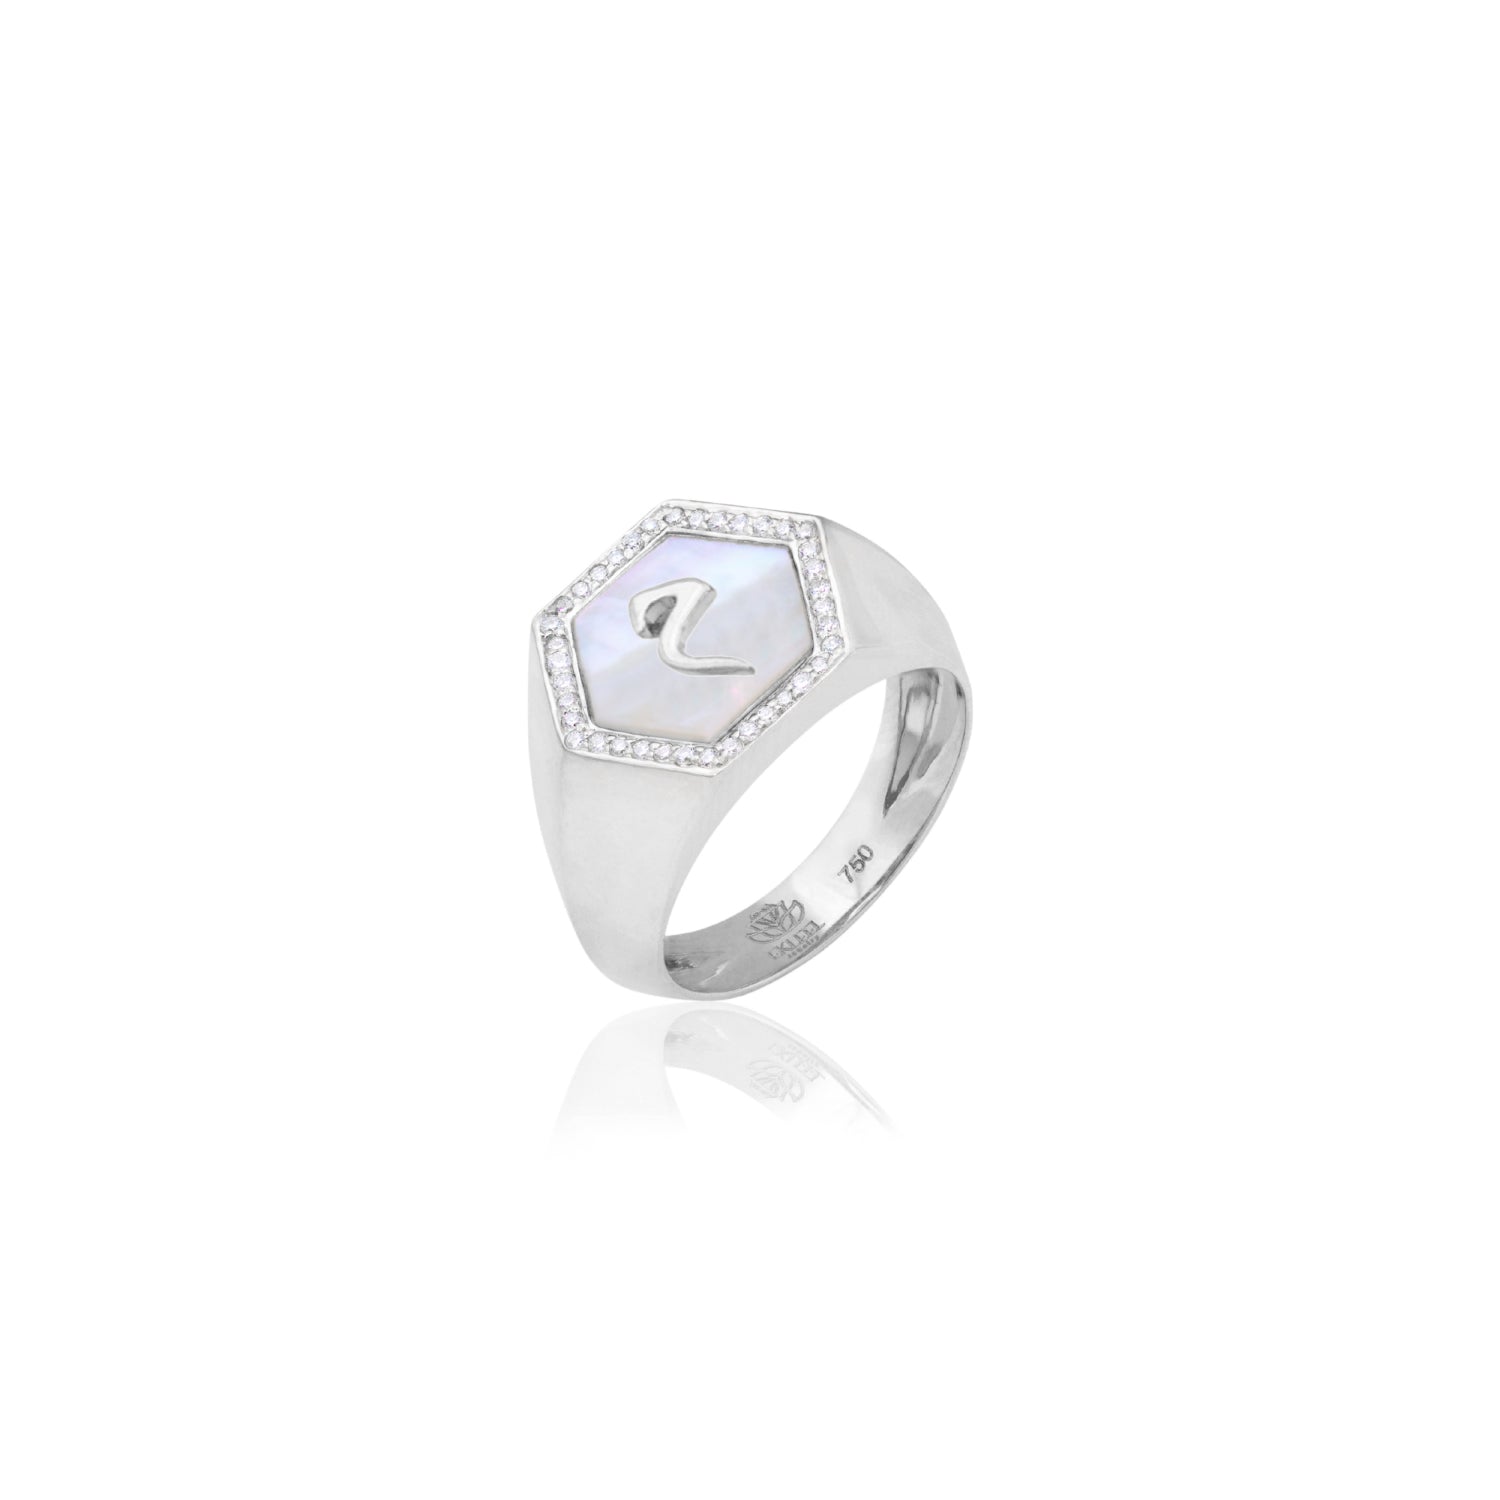 Qamoos 2.0 Letter م White Mother of Pearl and Diamond Signet Ring in White Gold